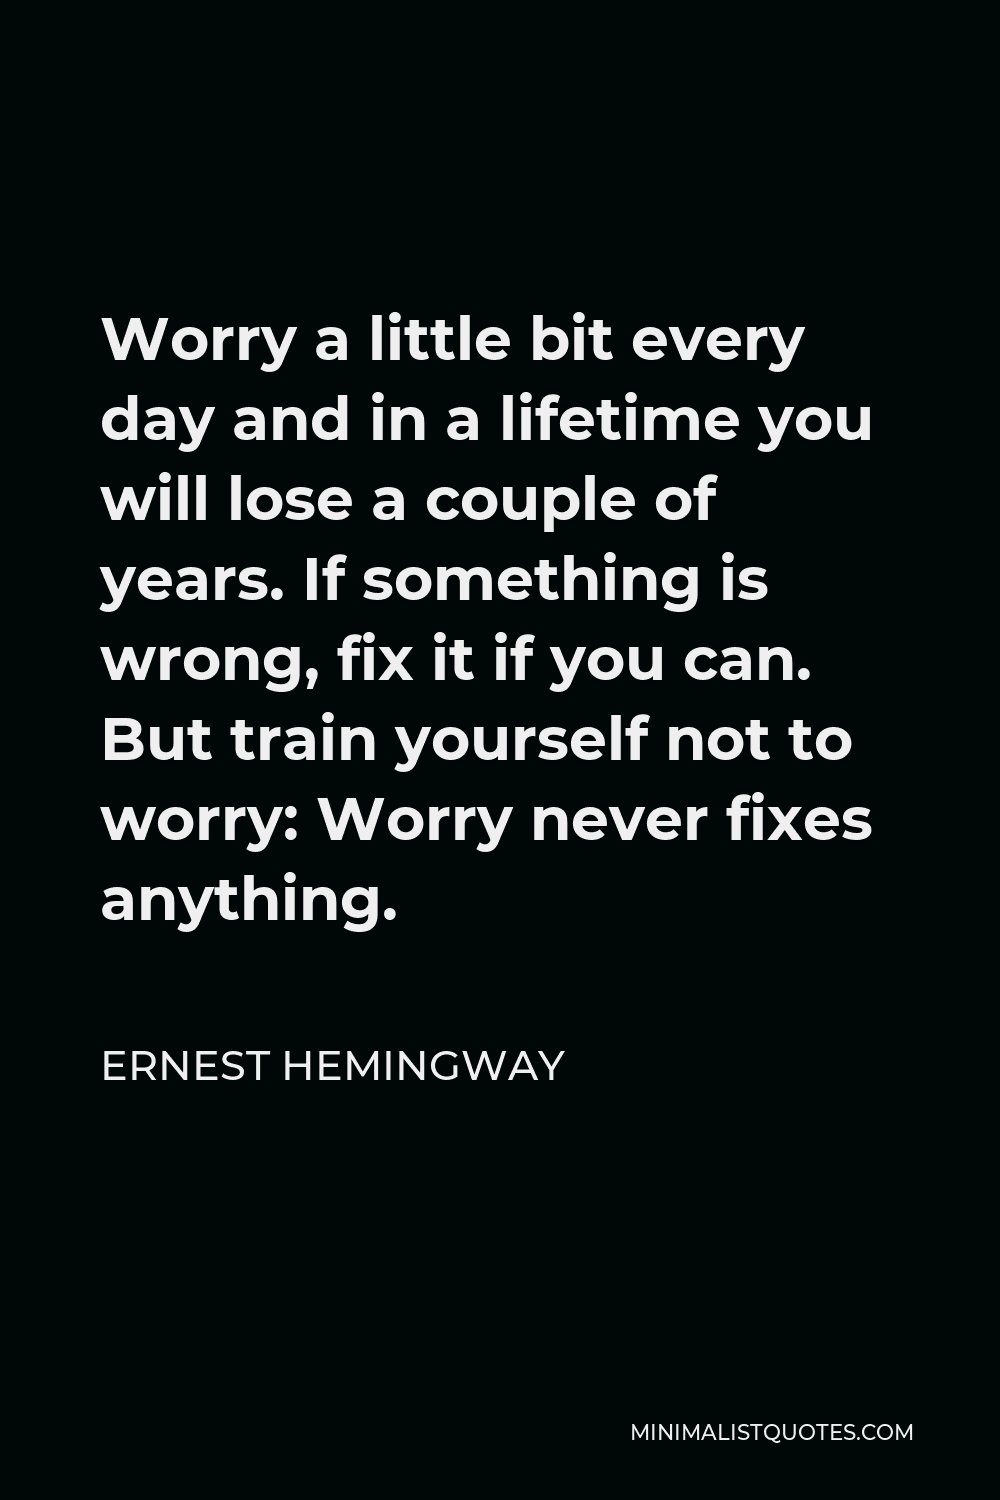 Ernest Hemingway Quote - Worry a little bit every day and in a lifetime you will lose a couple of years. If something is wrong, fix it if you can. But train yourself not to worry: Worry never fixes anything.